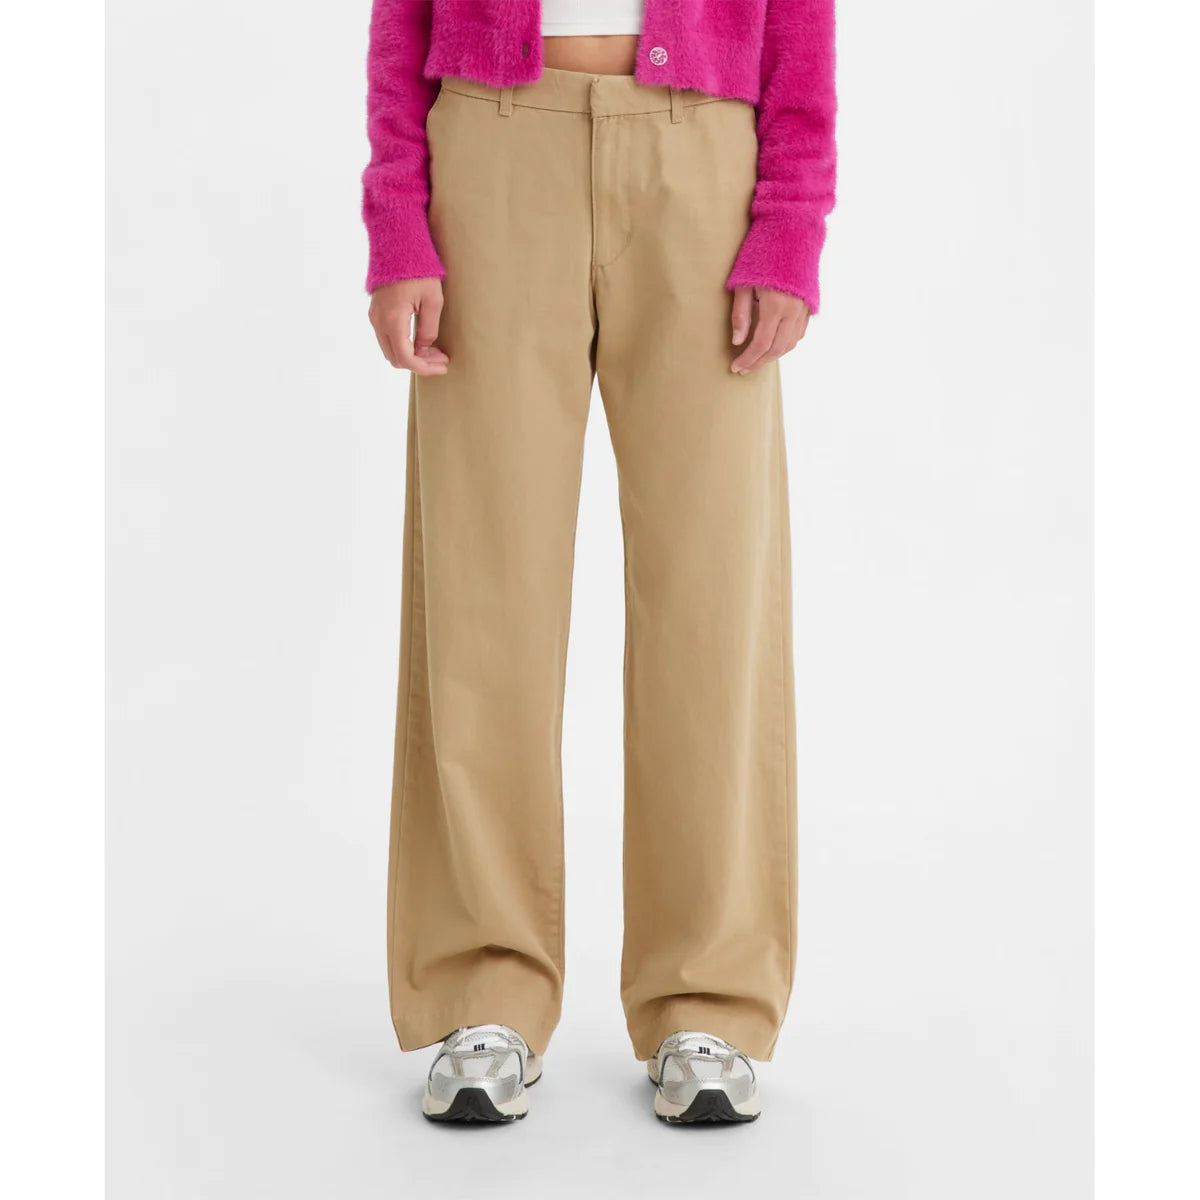 Baggy Trouser Pants - Wild and Heart